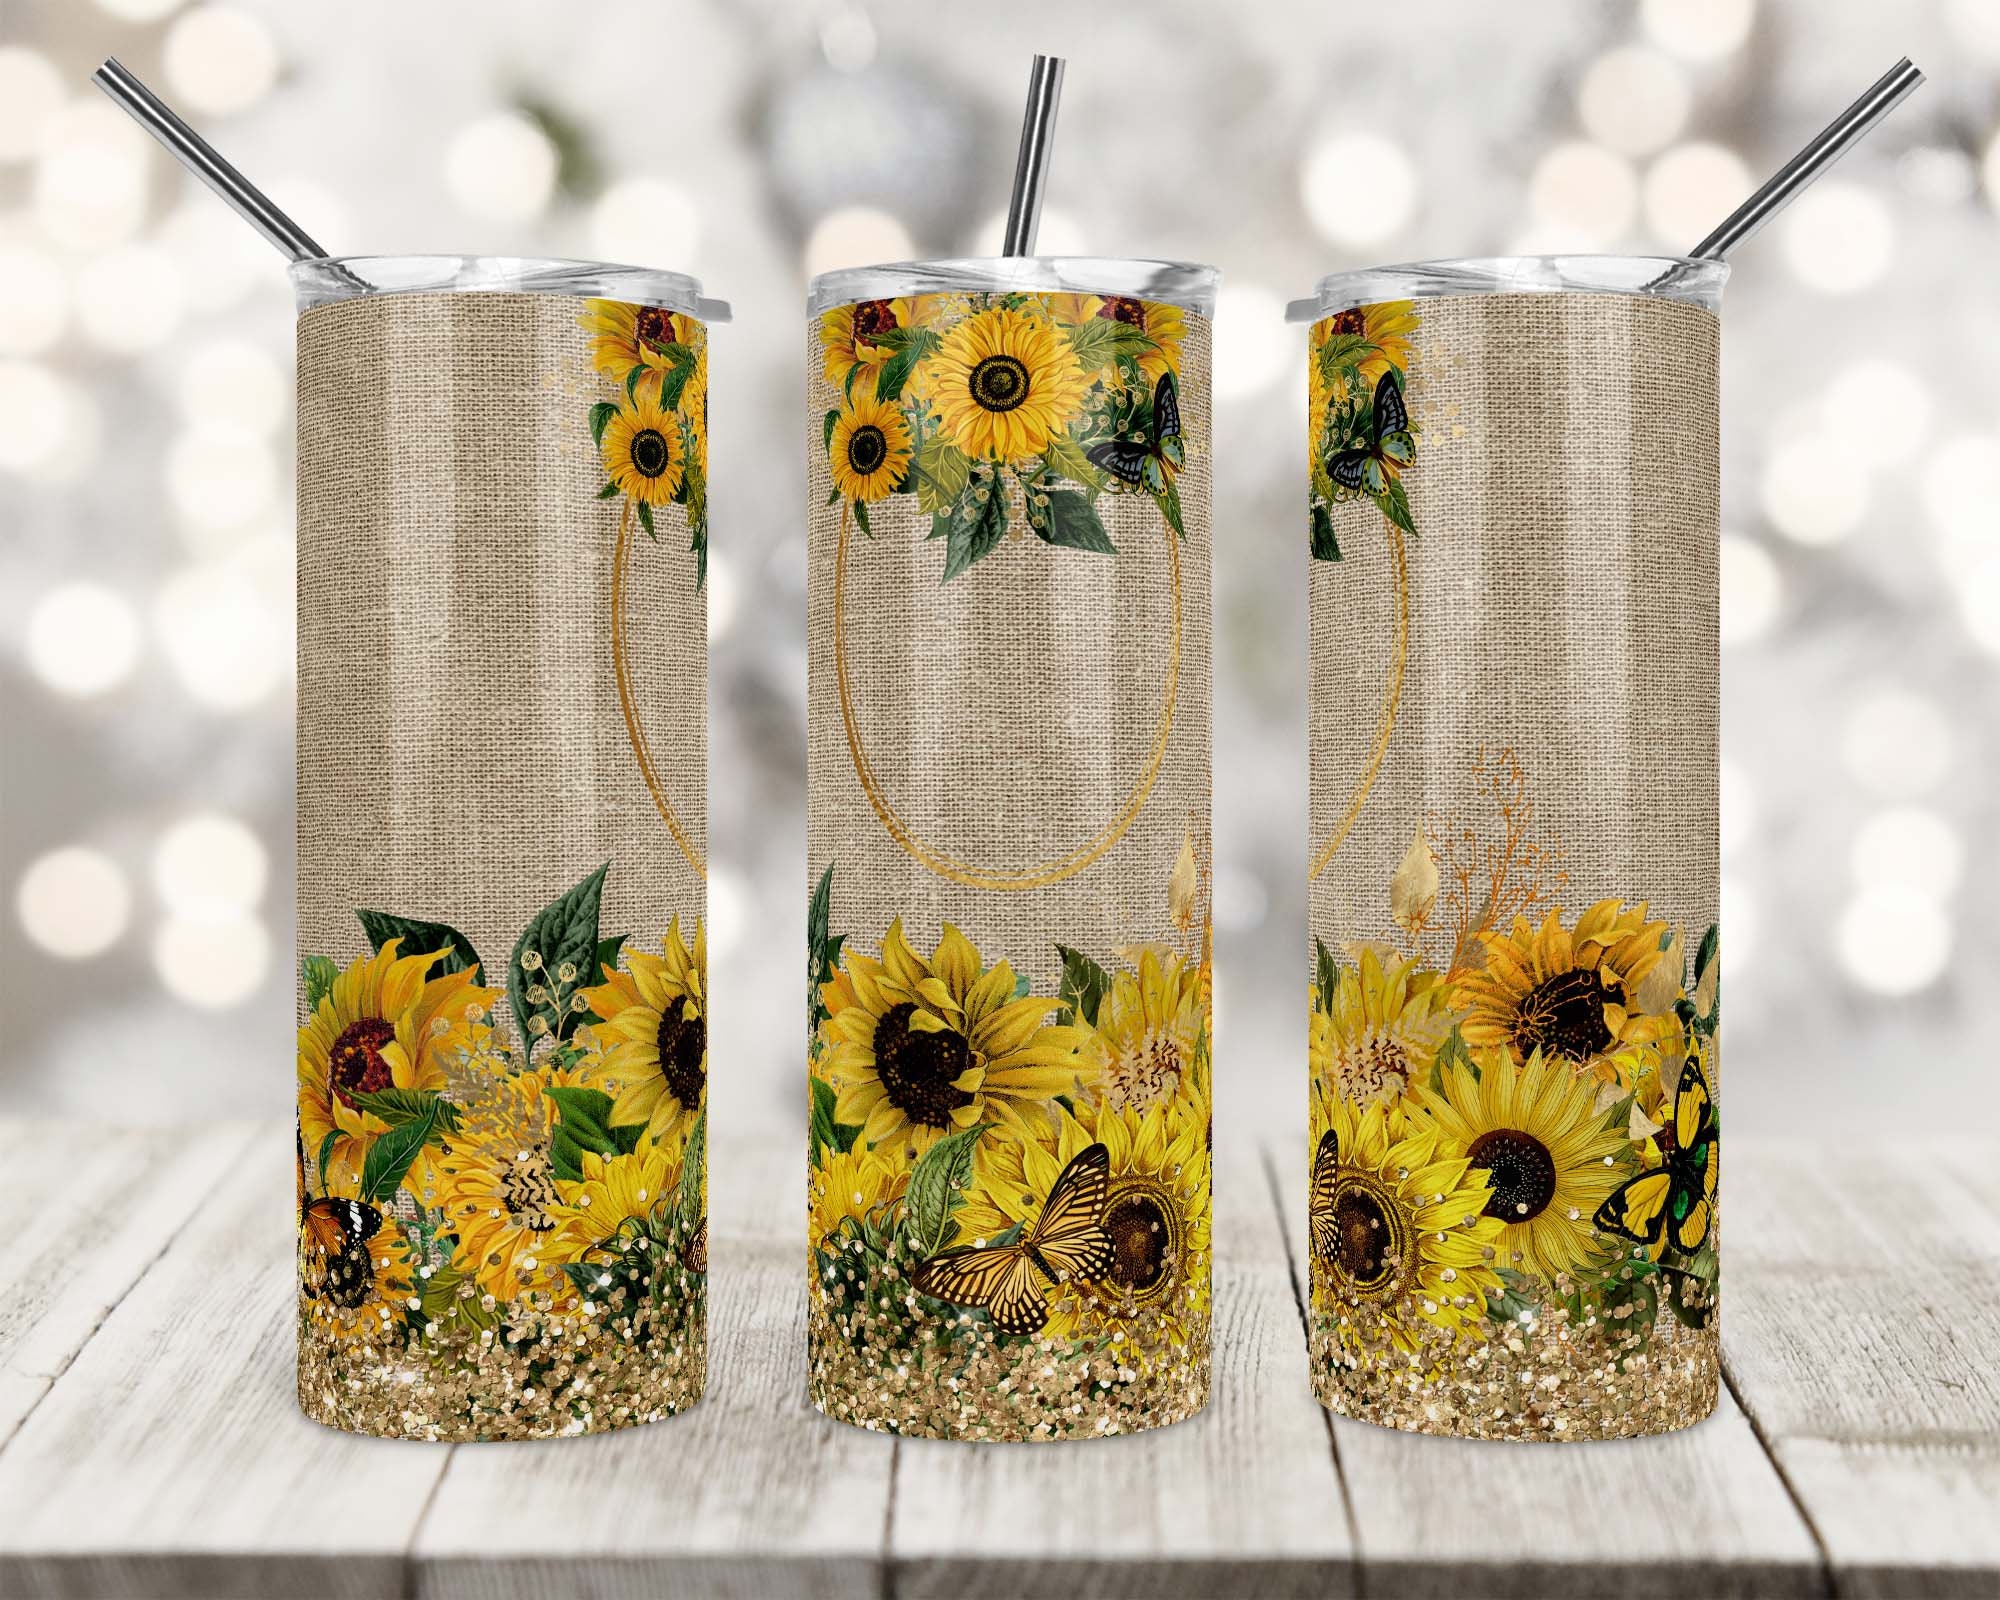 Wrap Around Sunflower Design Stainless Steel Coffee Tumbler Thermos 20 Oz  from Primitives by Kathy - Cherryland Sales